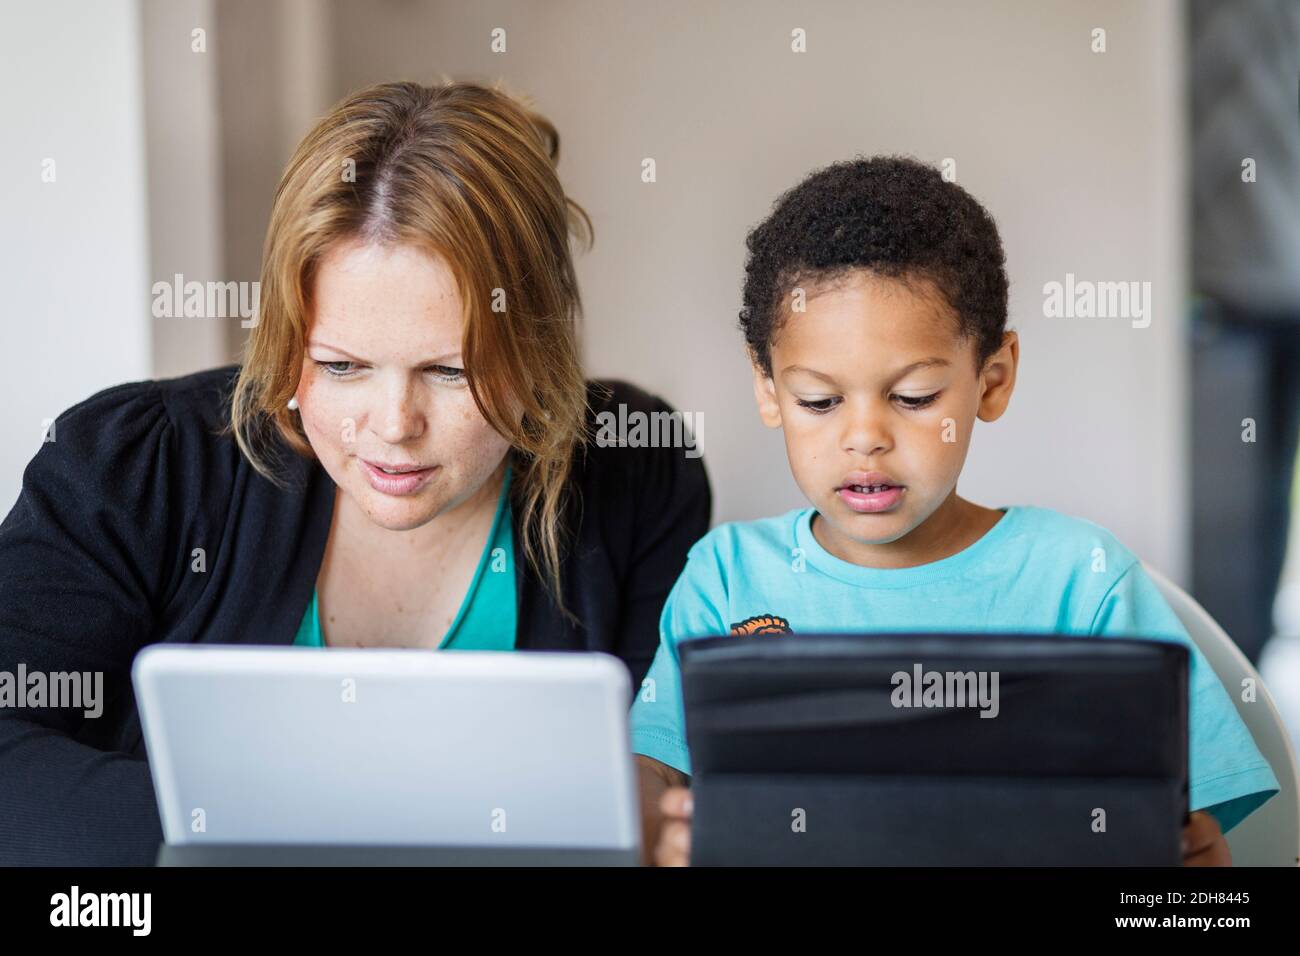 Mother and son using digital tablets at home Stock Photo